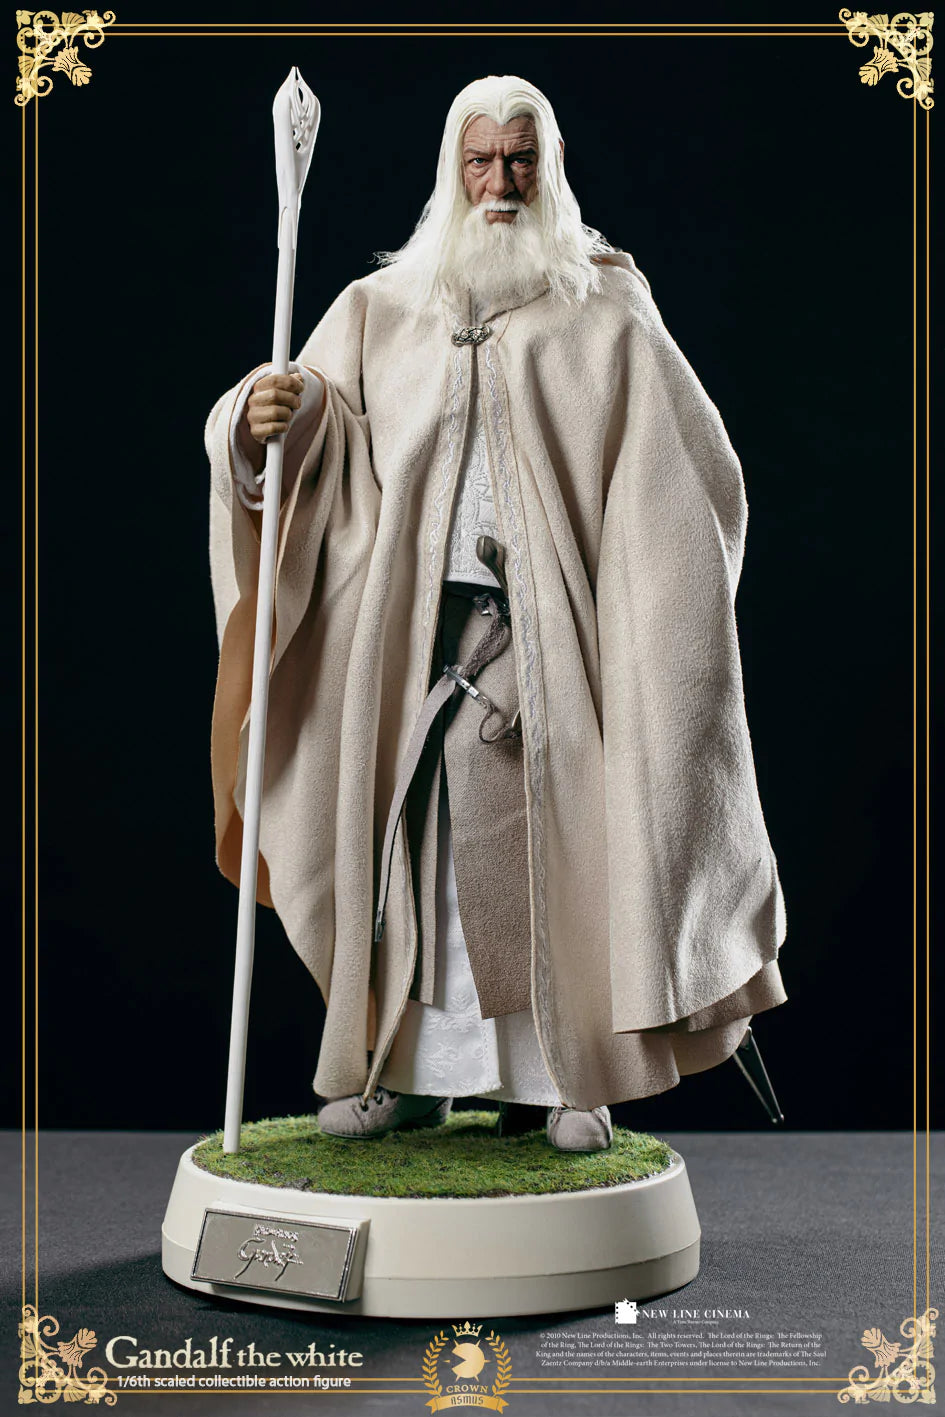 Asmus Toys - The Lord of the Rings - Heroes of Middle-Earth - Gandalf the White &amp; Shadowfax (1/6 Scale) - Marvelous Toys